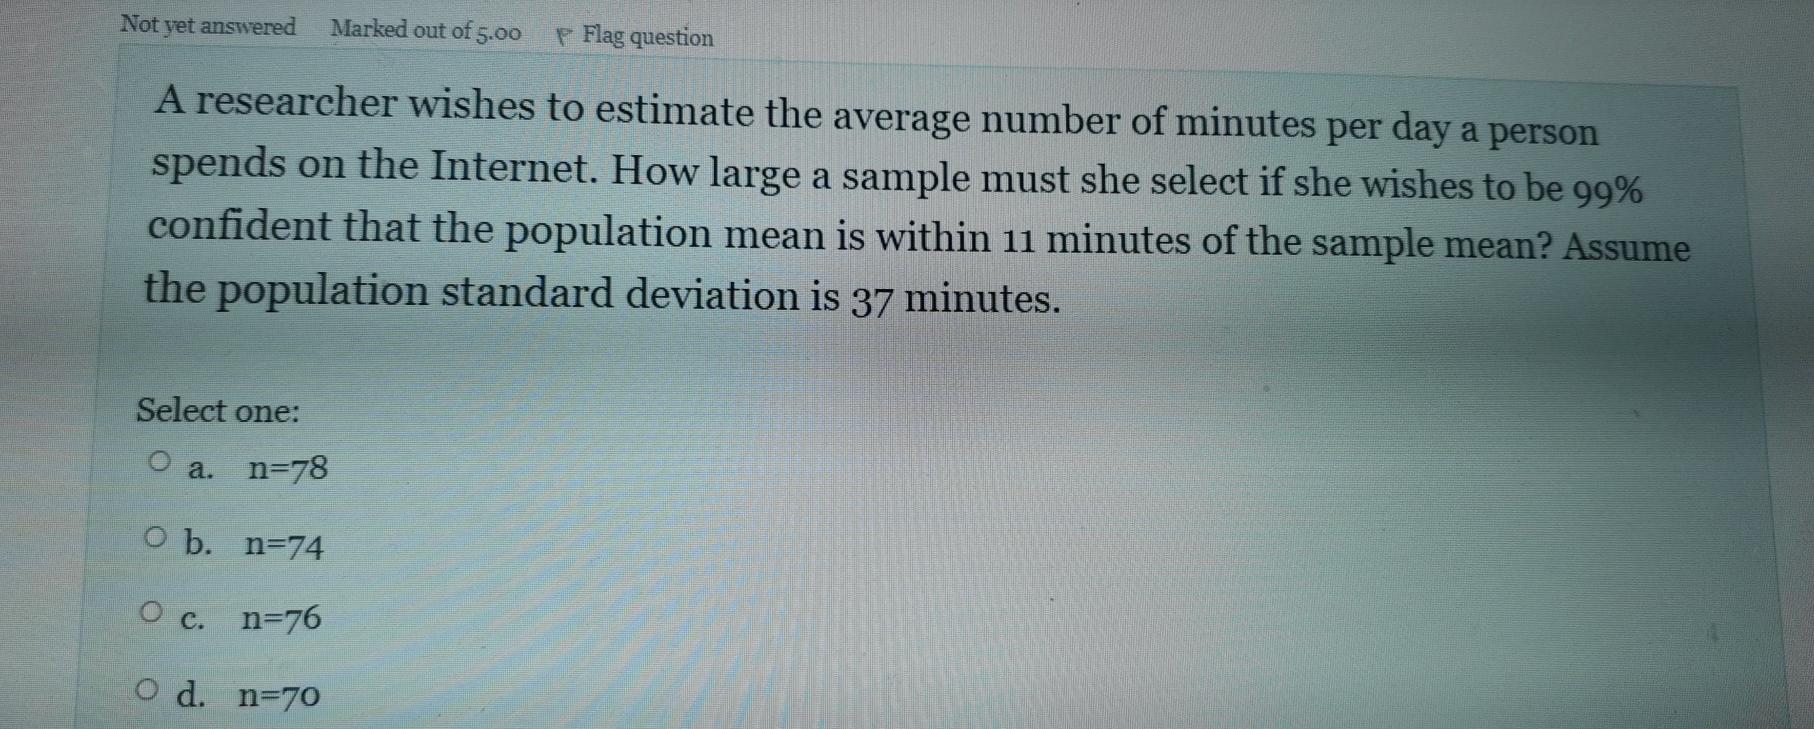 Not Yet Answered Marked Out Of 5 00 Flag Question A Researcher Wishes To Estimate The Average Number Of Minutes Per Day 1